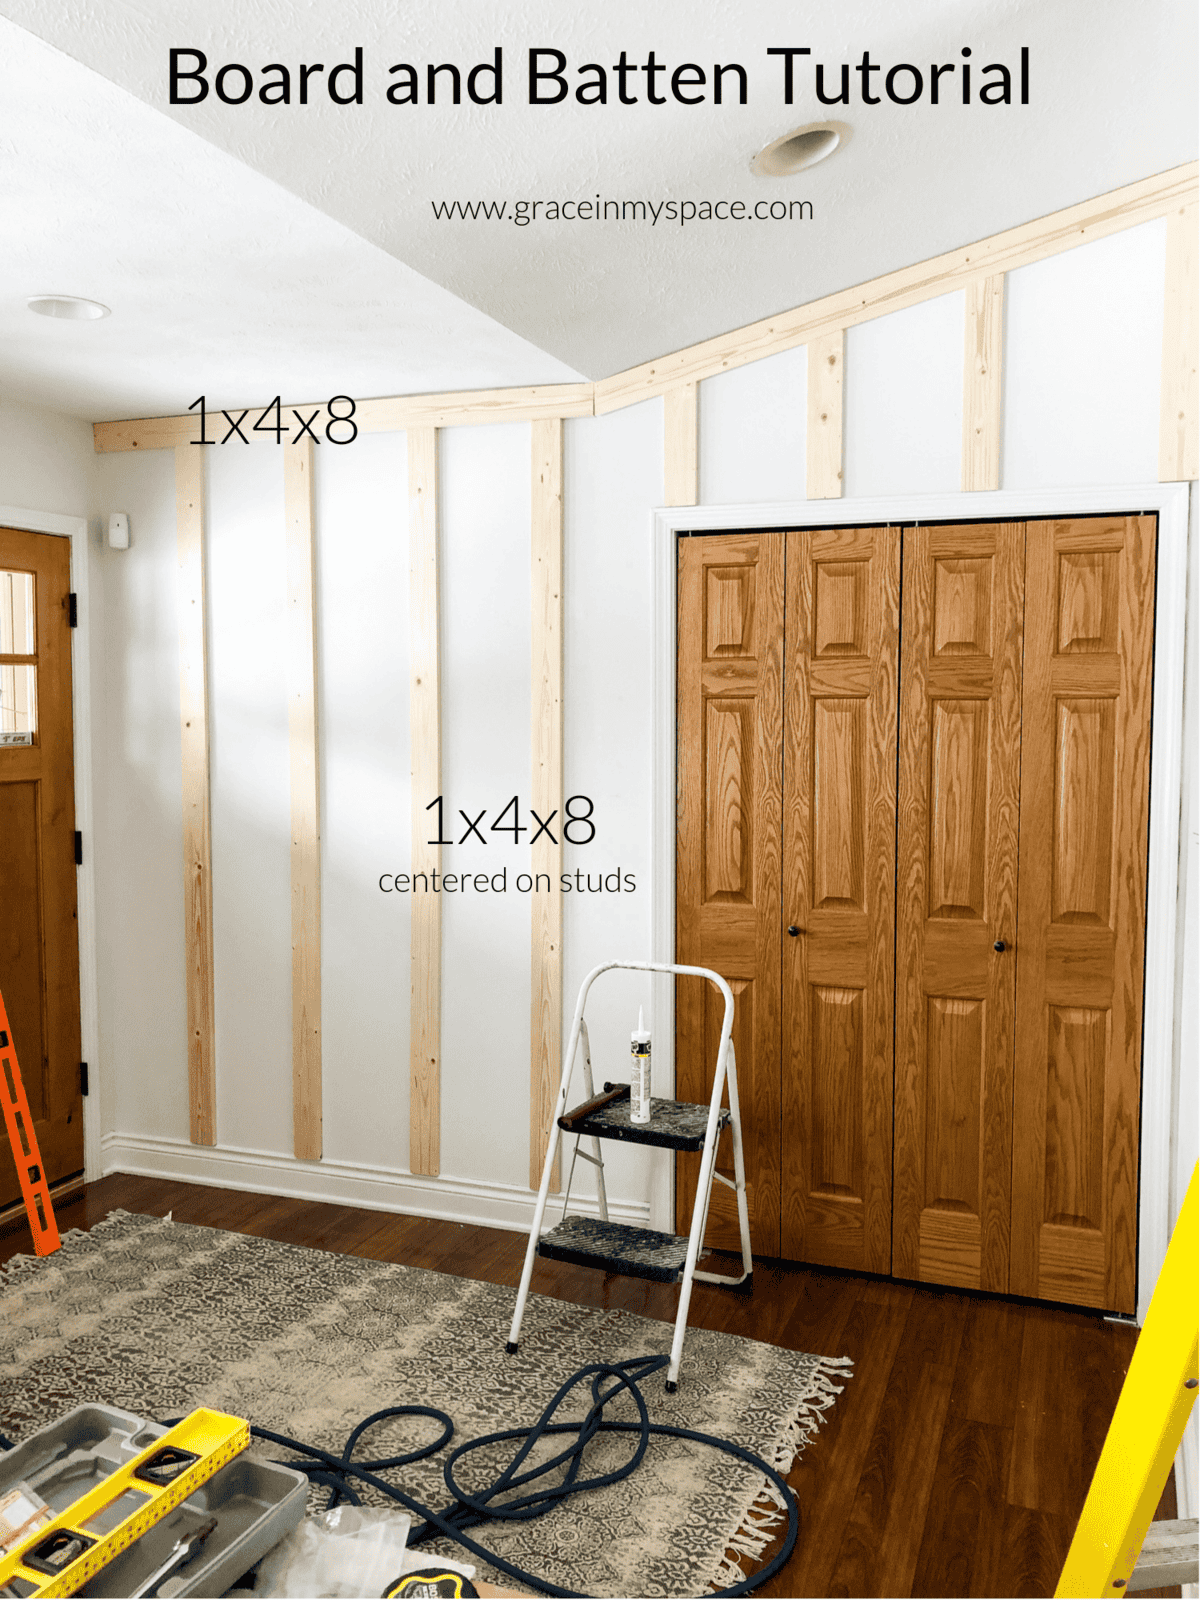 Board and batten is an easy and affordable way to create a custom look! Here is a full tutorial for how to install board and batten as an accent wall! #fromhousetohaven #boardandbatten #accentwall